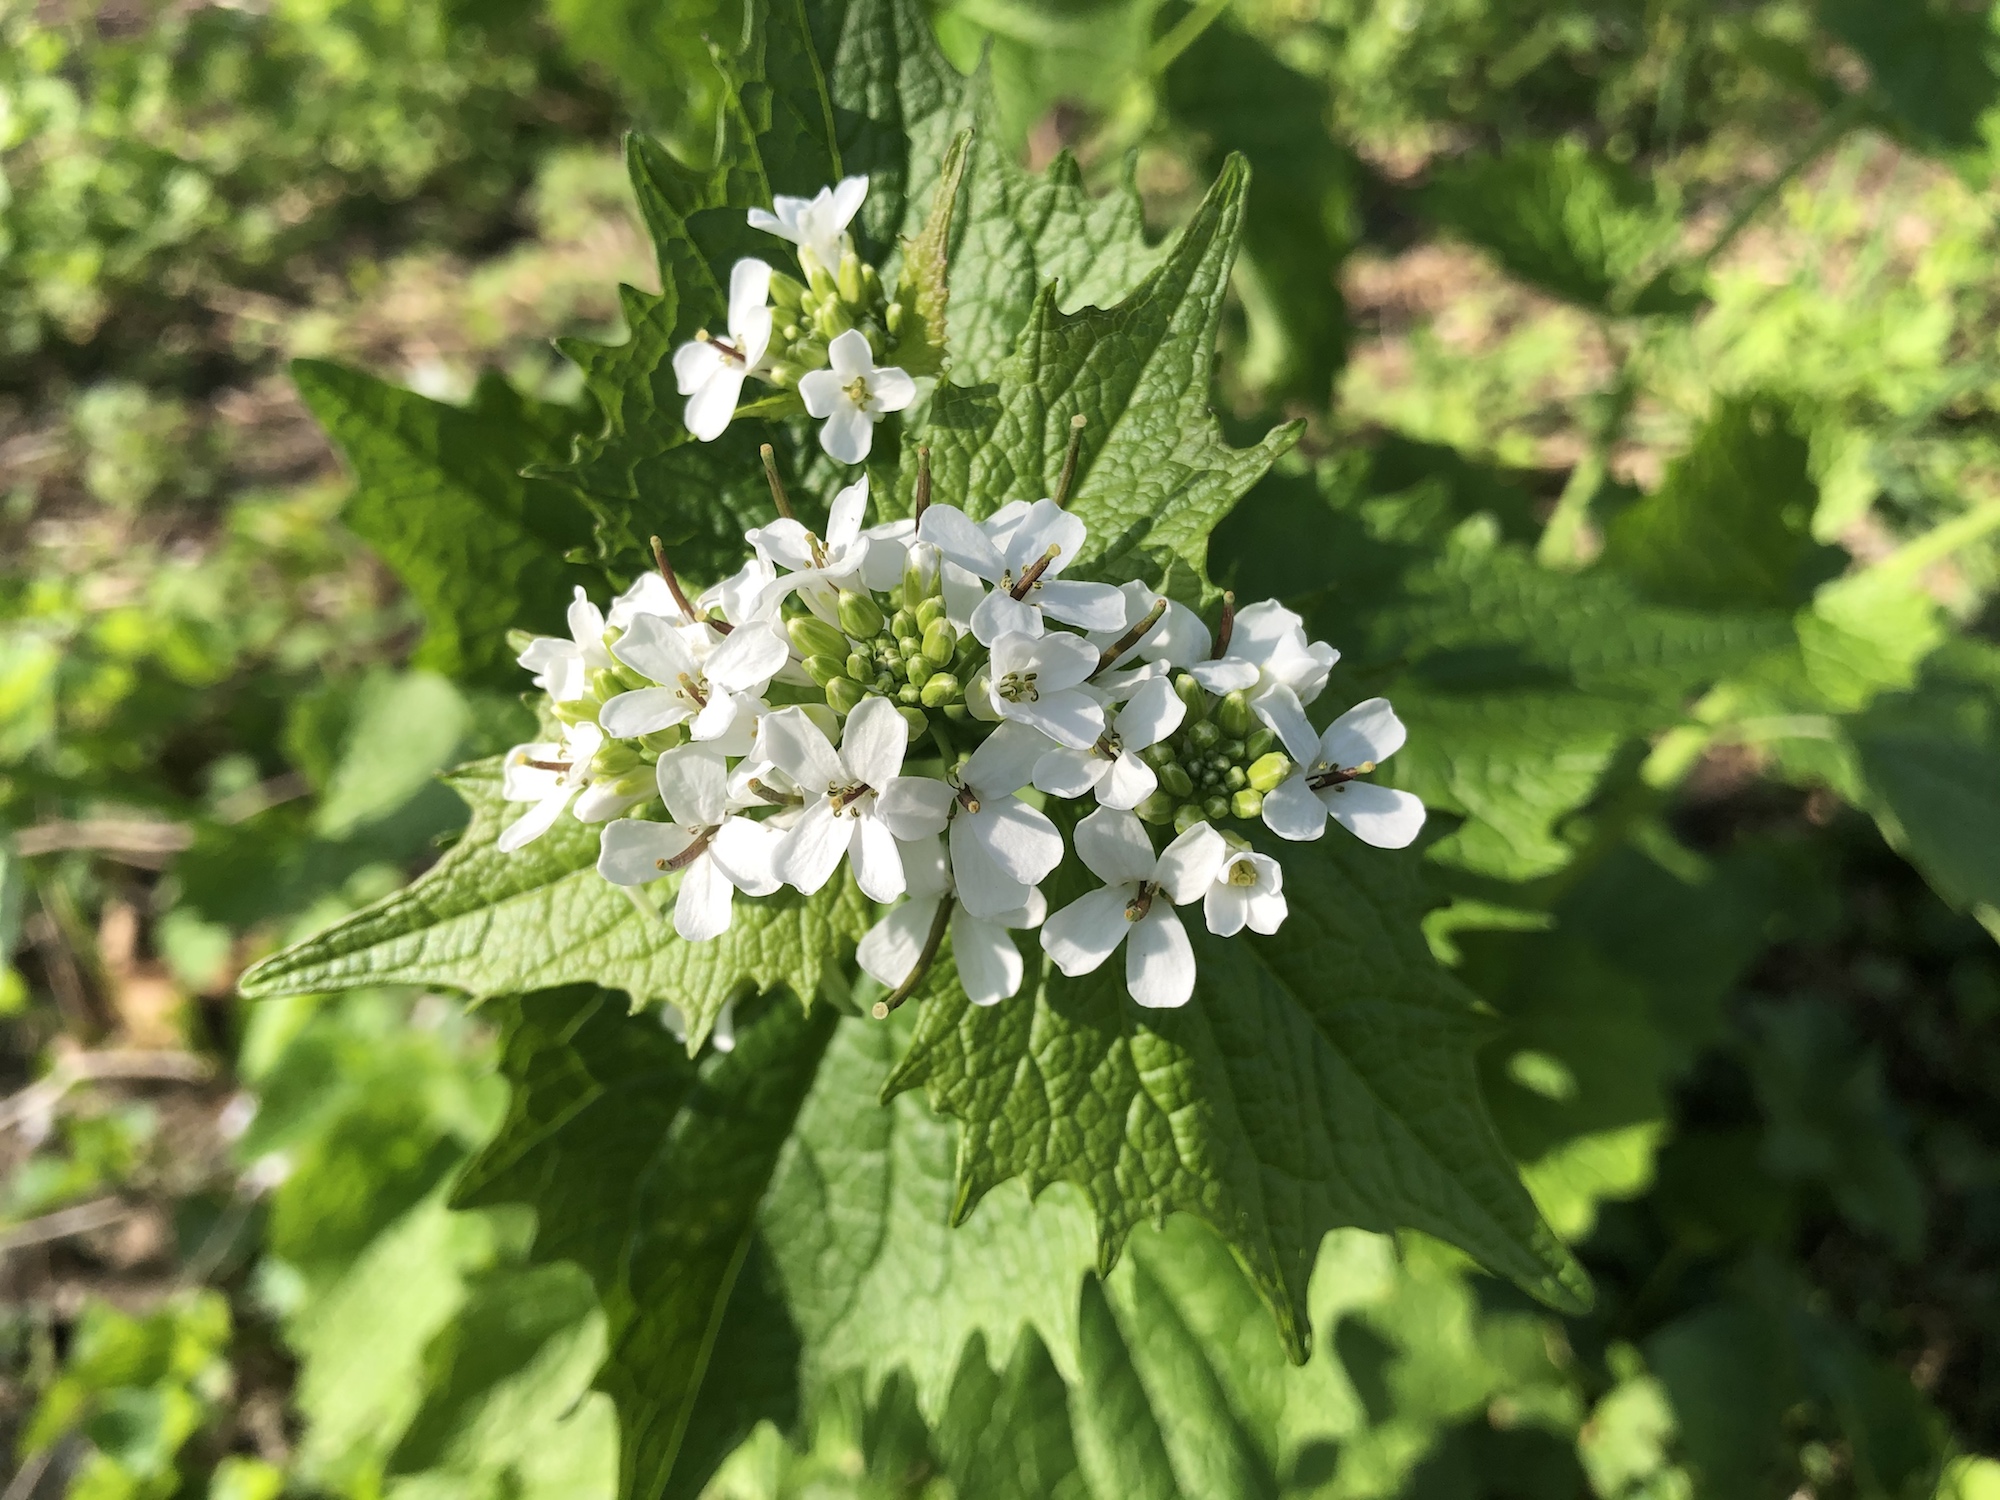 Garlic Mustard in woods by Sycamore Tree on Arbor Drive in Madison, Wisconsin on May 16, 2020.